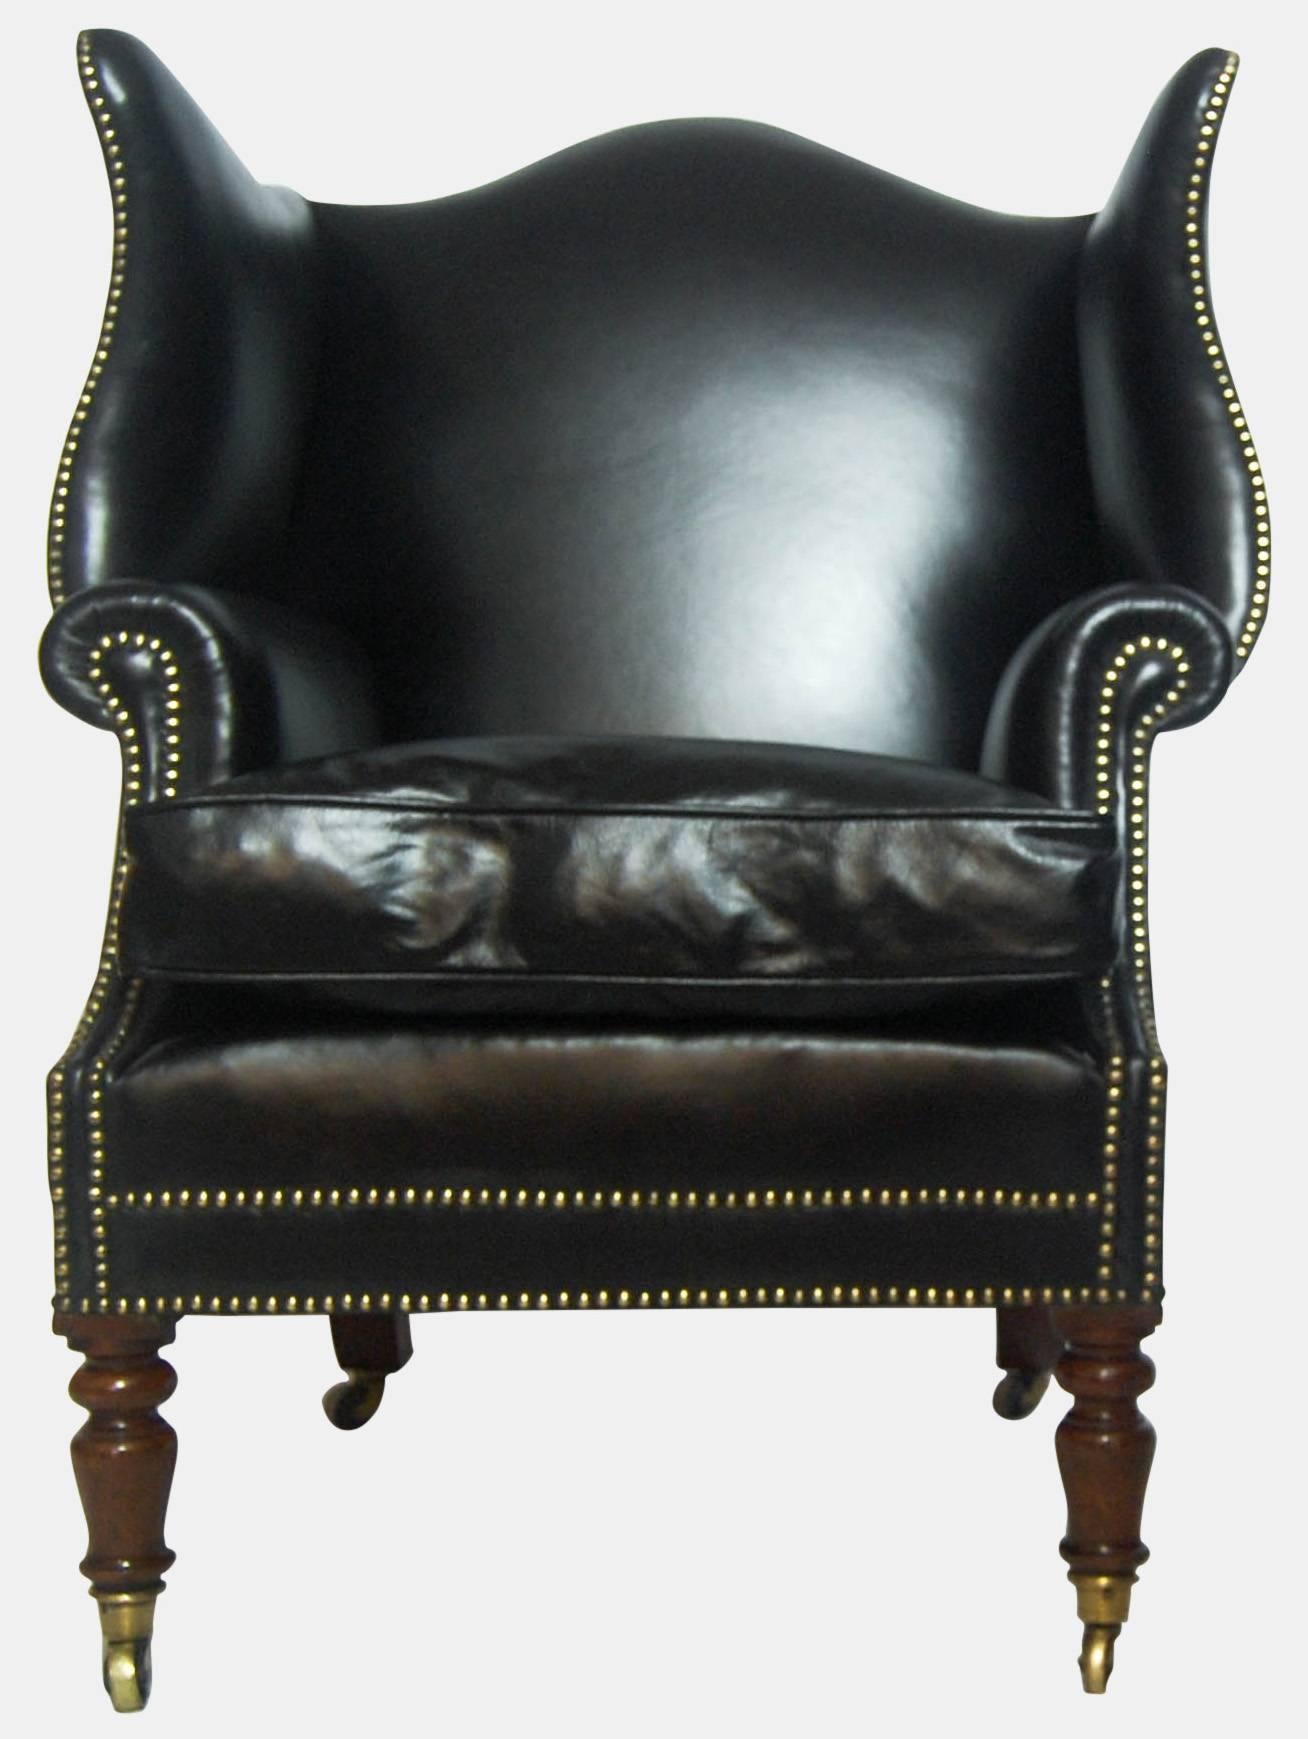 Early 19th century mahogany and leather wingback library chair.